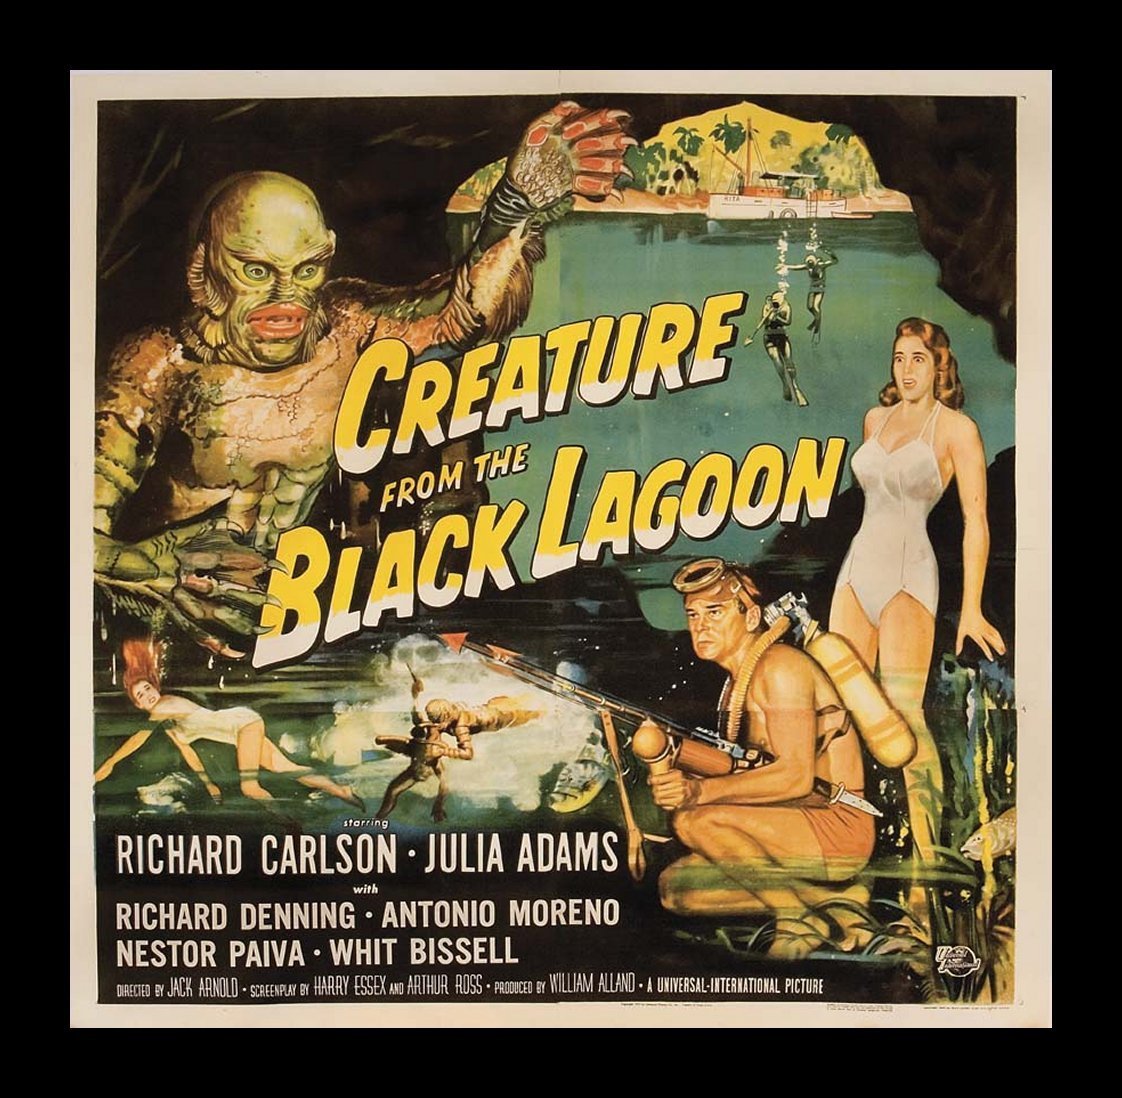 Creature-From-The-Black-Lagoon-classic-science-fiction-films-3846592-1122-1098.jpg